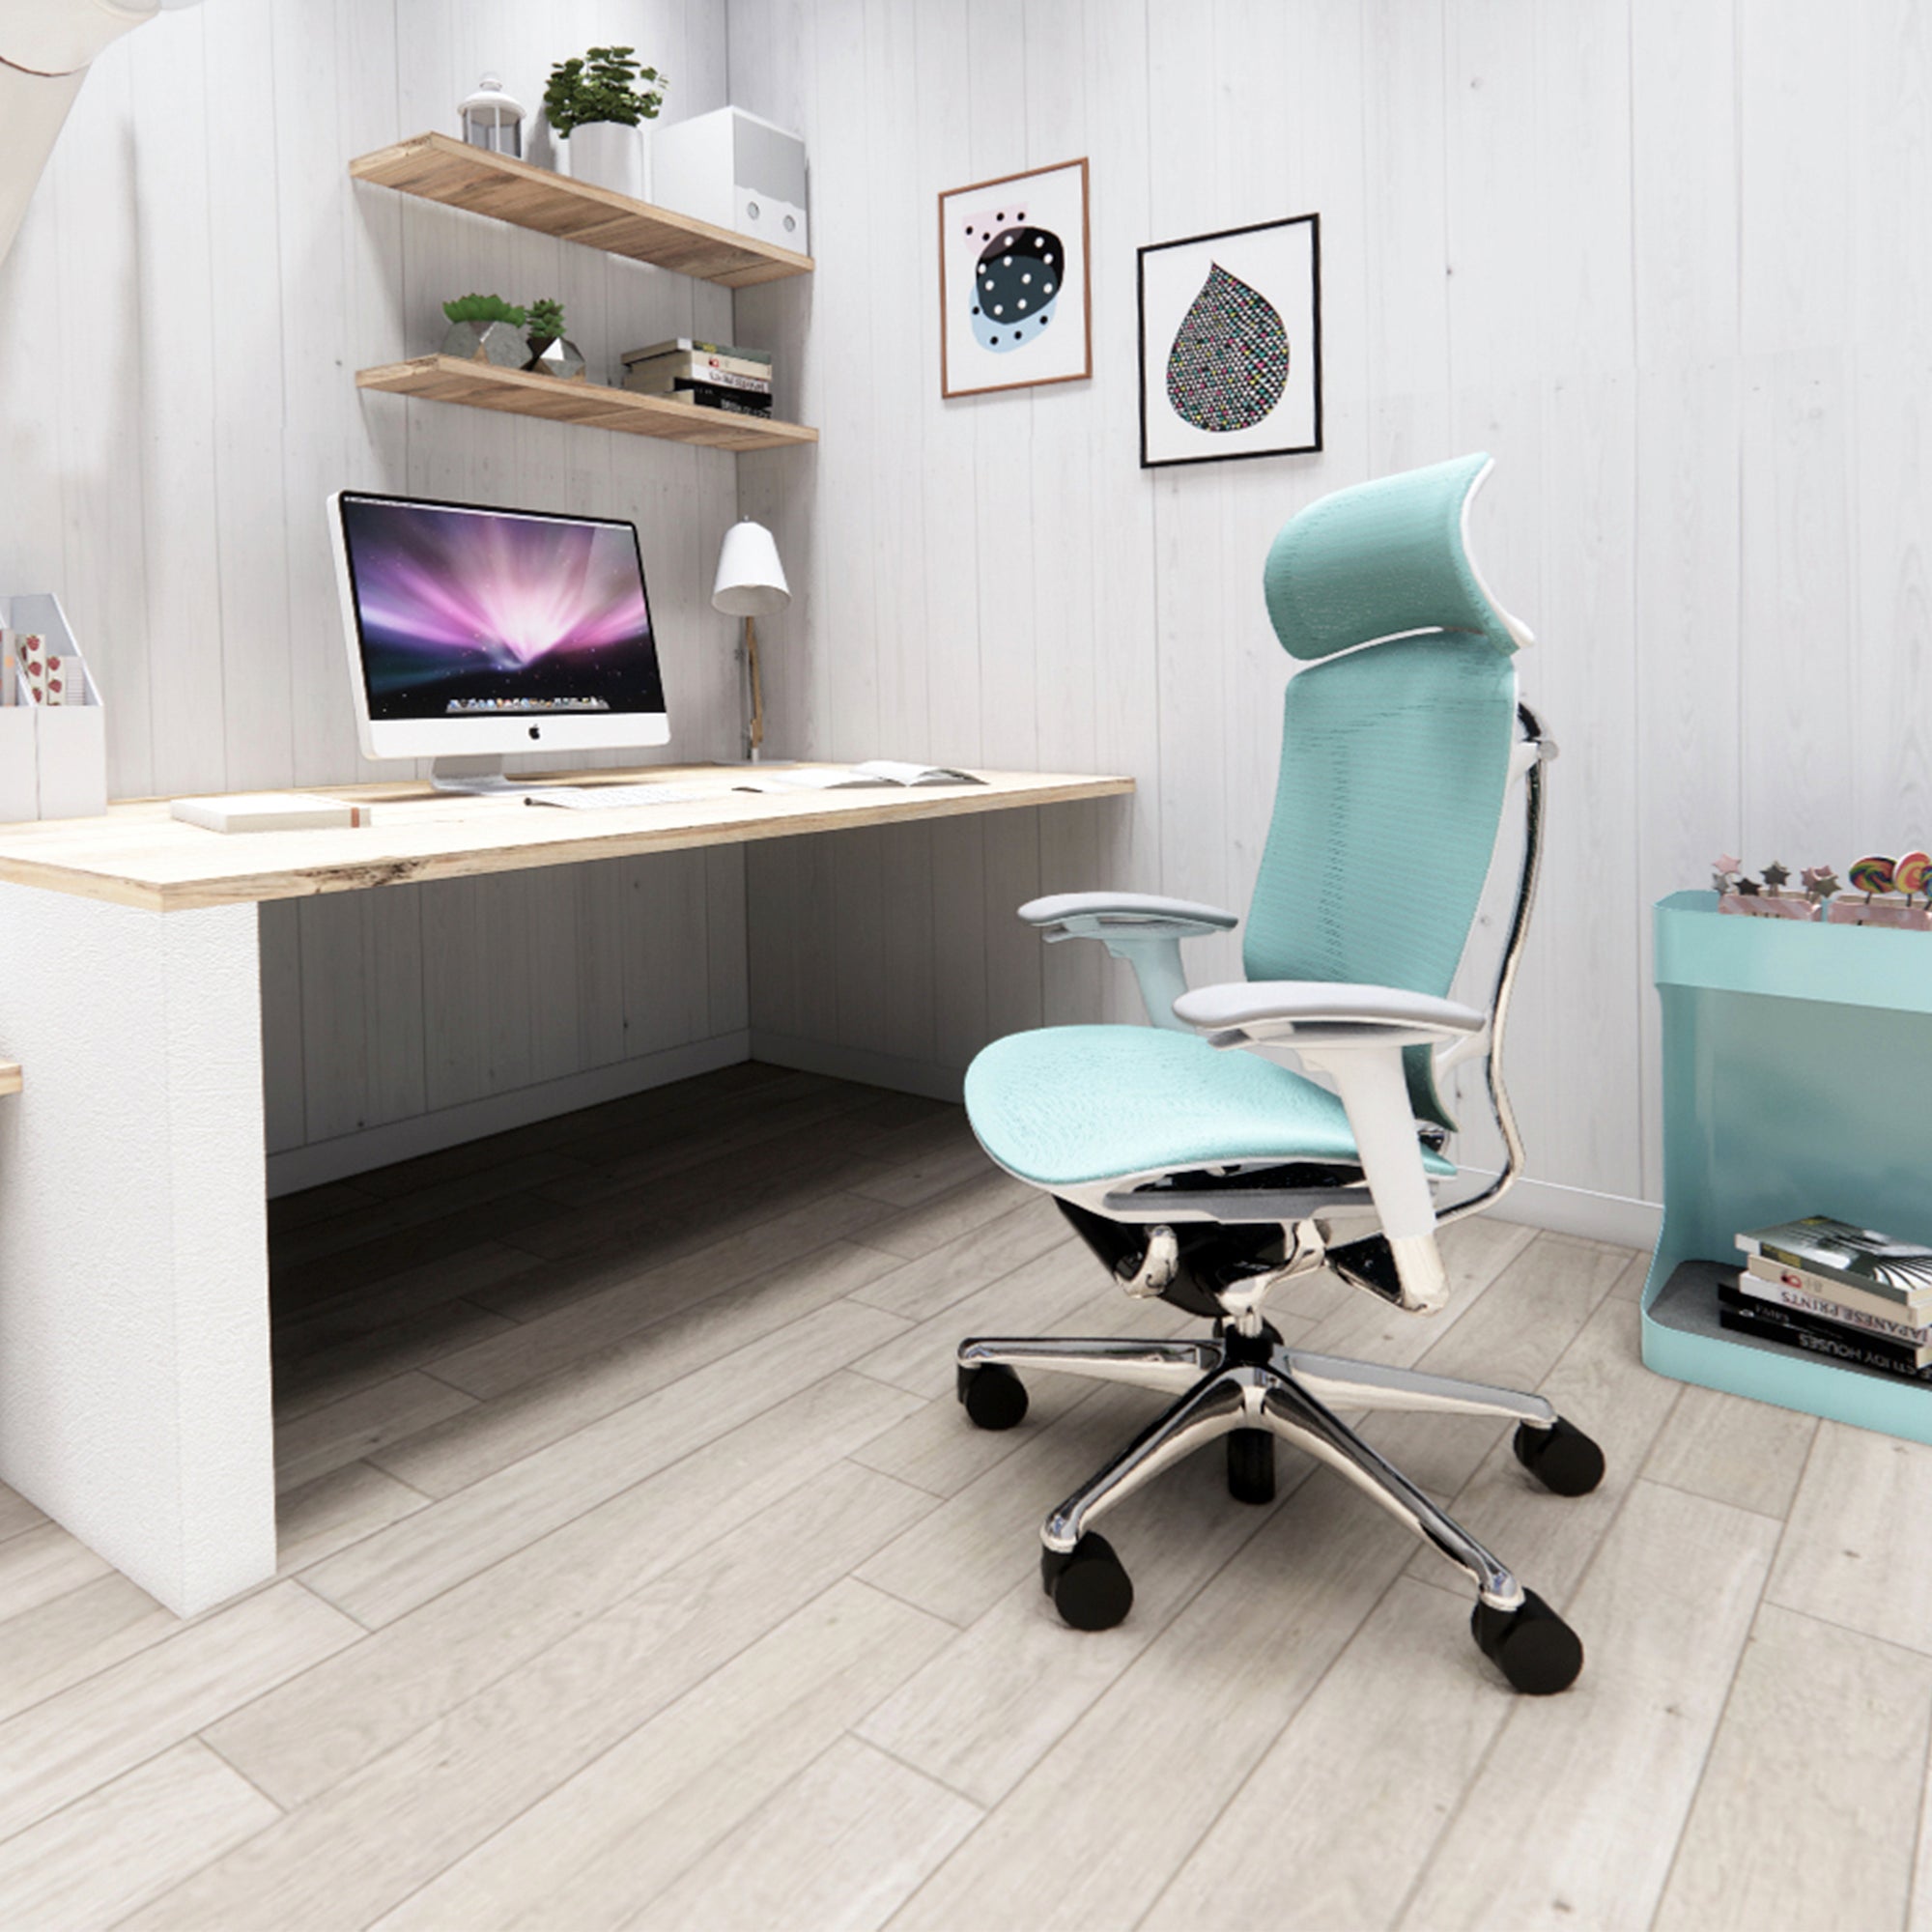 Stylish office chair - an office chair that can provide a sense of beauty and fashion, making the study room more stylish.